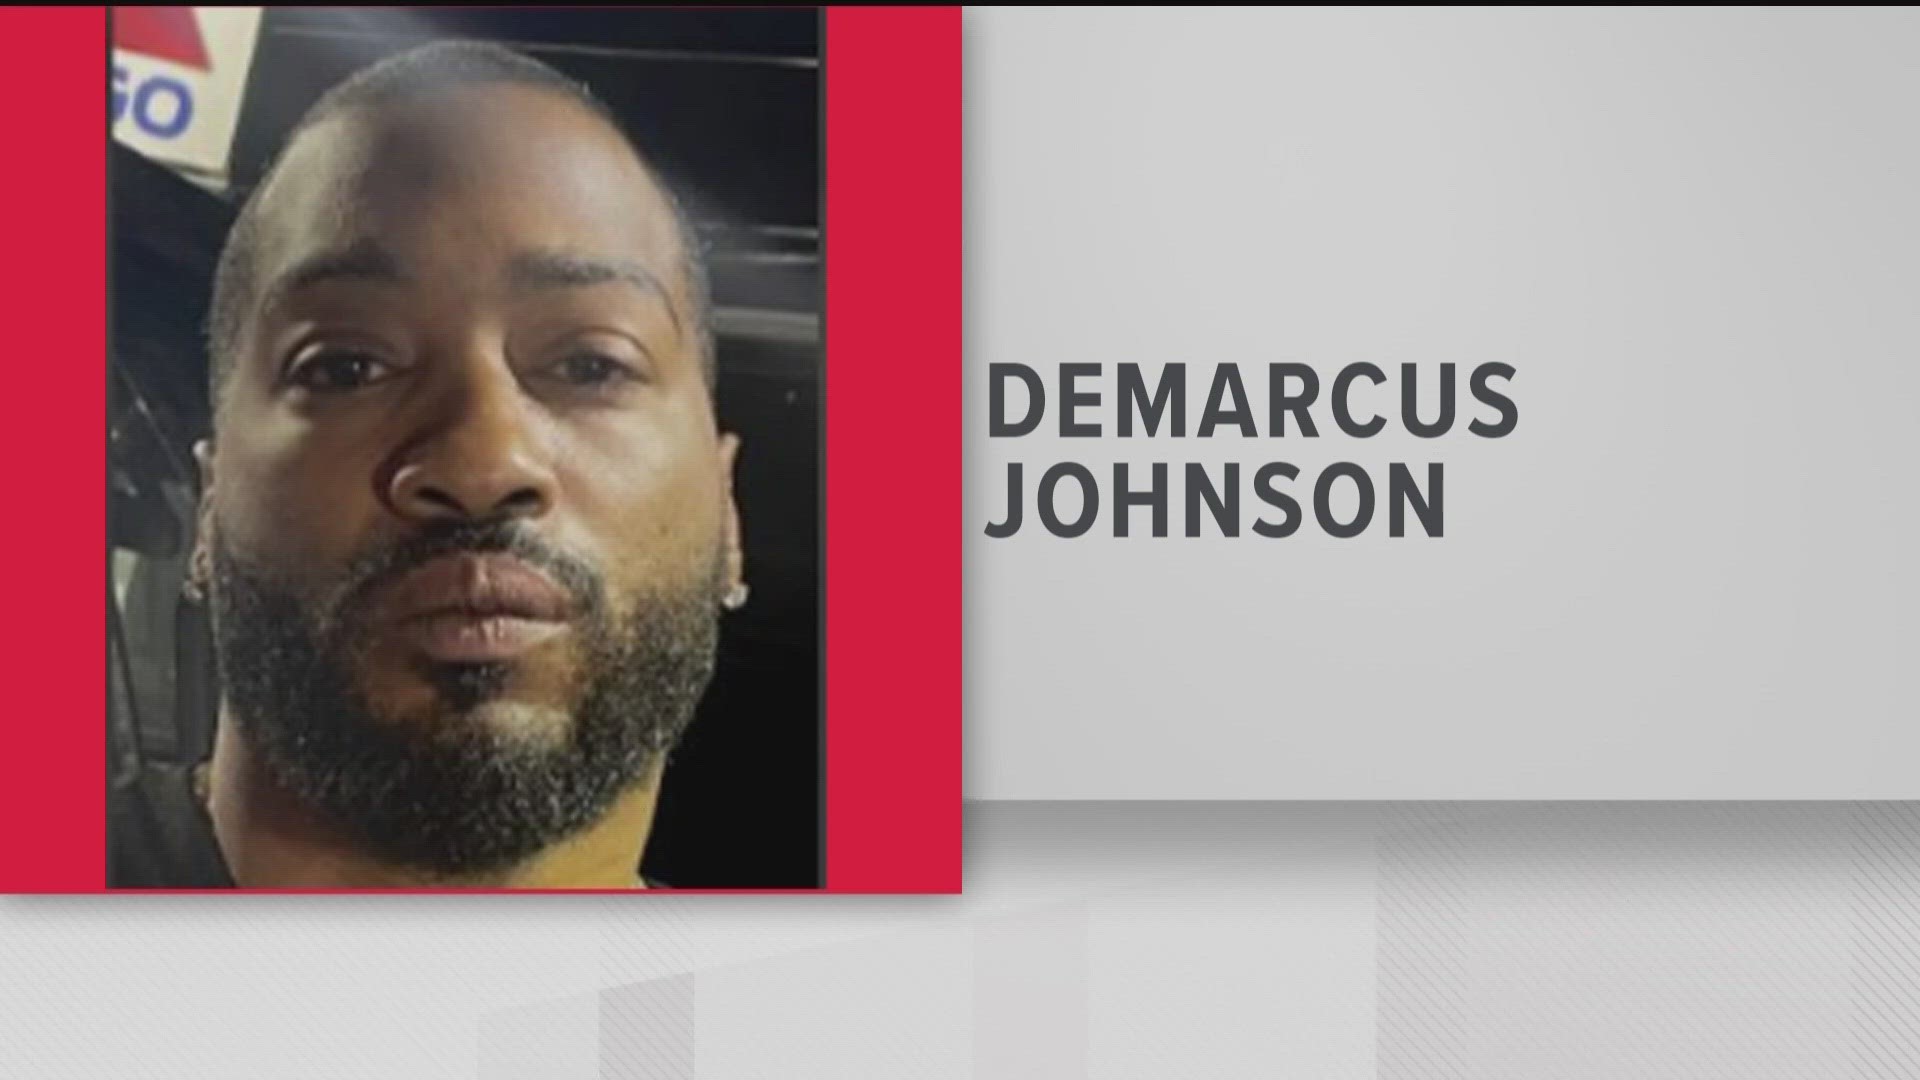 The Alpharetta Police Department said Demarcus Johnson faces charges including rape, kidnapping, aggravated assault and felony theft by taking in the case.